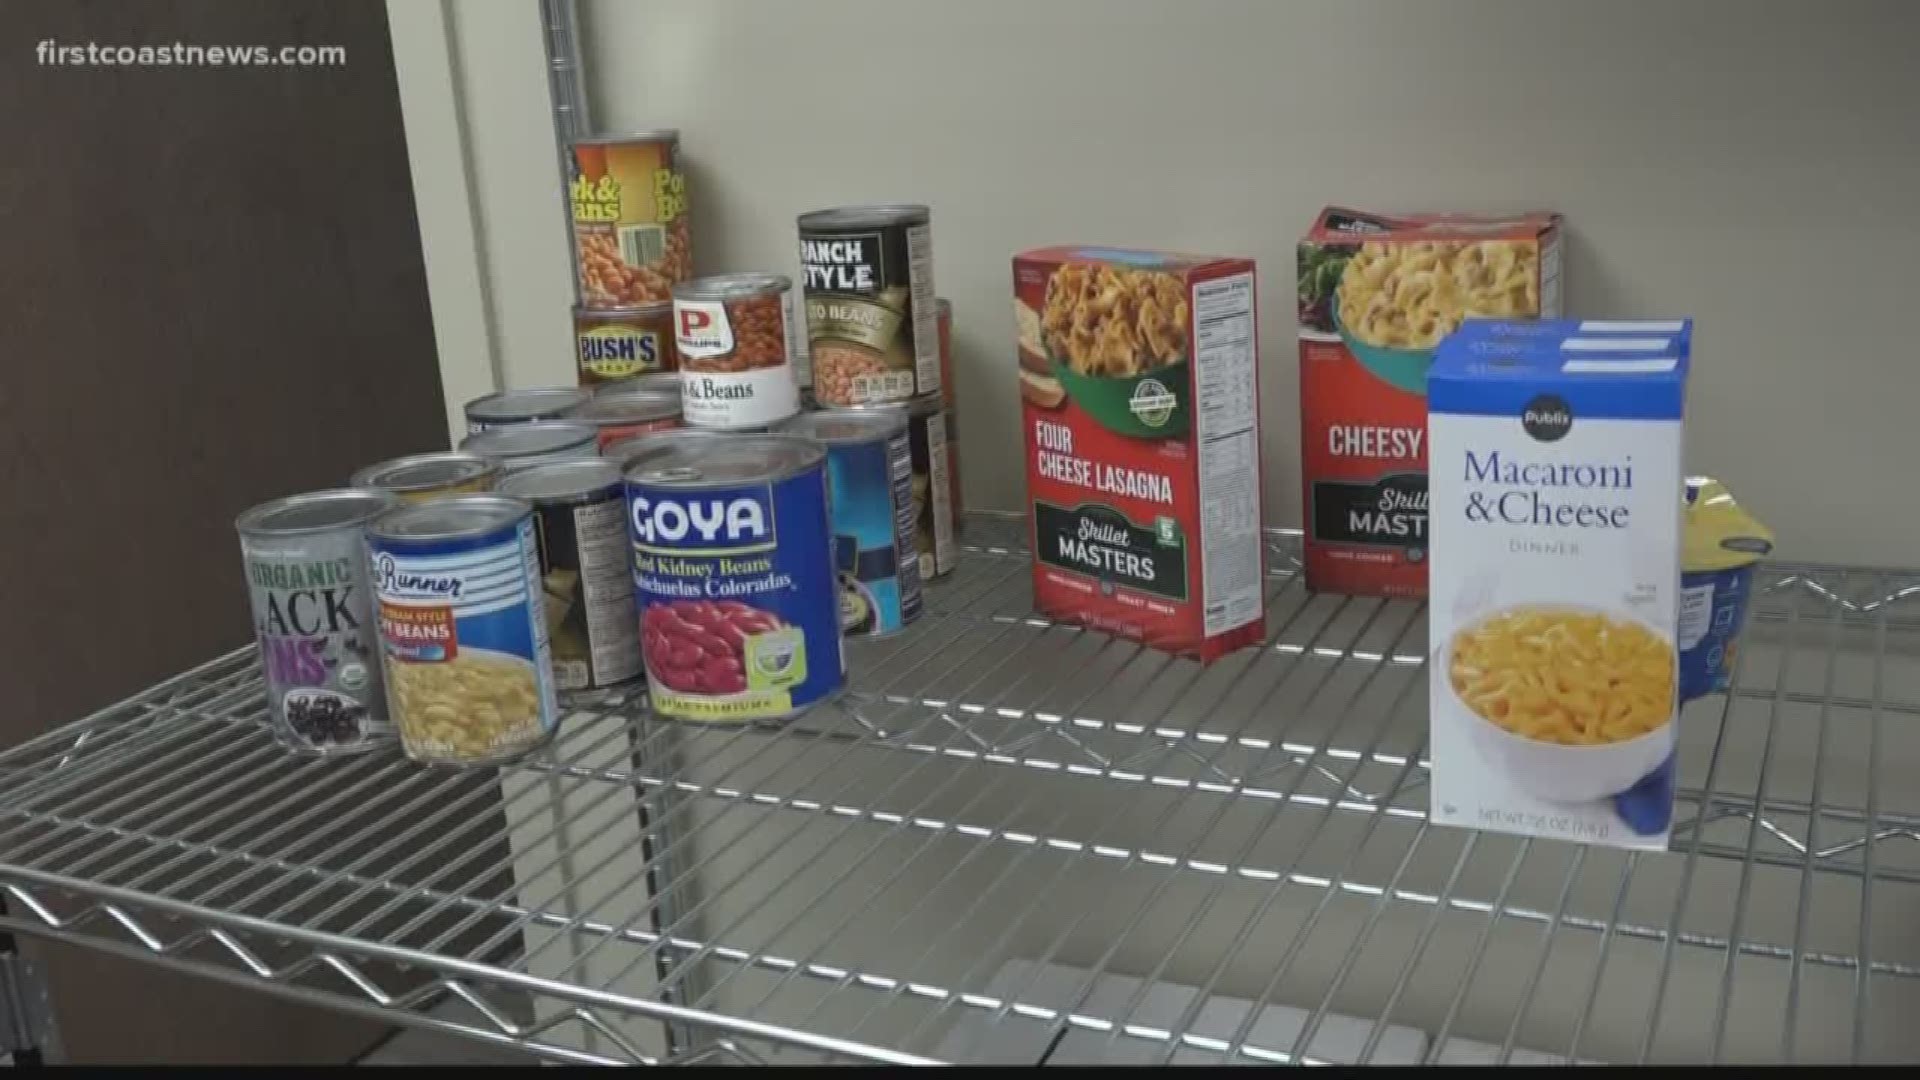 The struggle of feeding a family increases over the summer when kids are home from school and can't rely on free school breakfast and lunch. Max Block Food Pantry is a local food pantry that could use donations to help feed the community this summer.